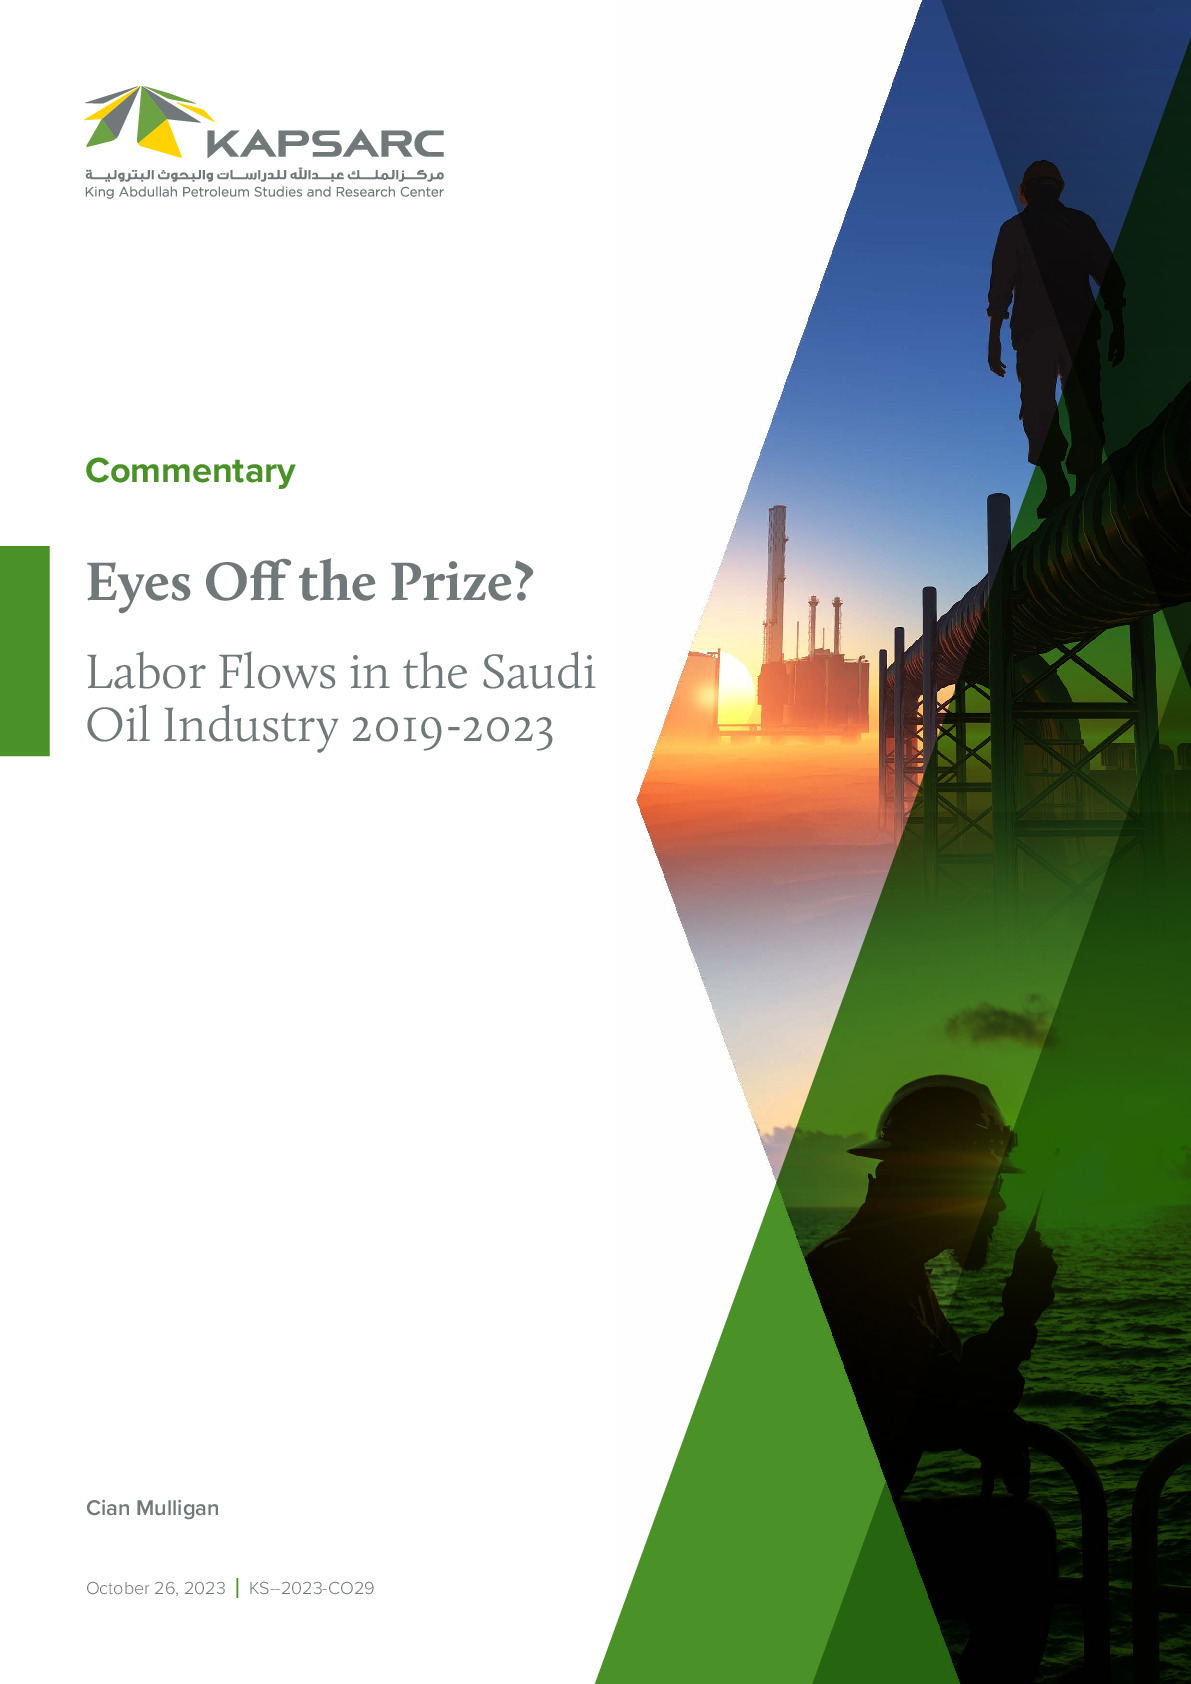 Eyes Off the Prize? Labor Flows in the Saudi Oil Industry 2019-2023